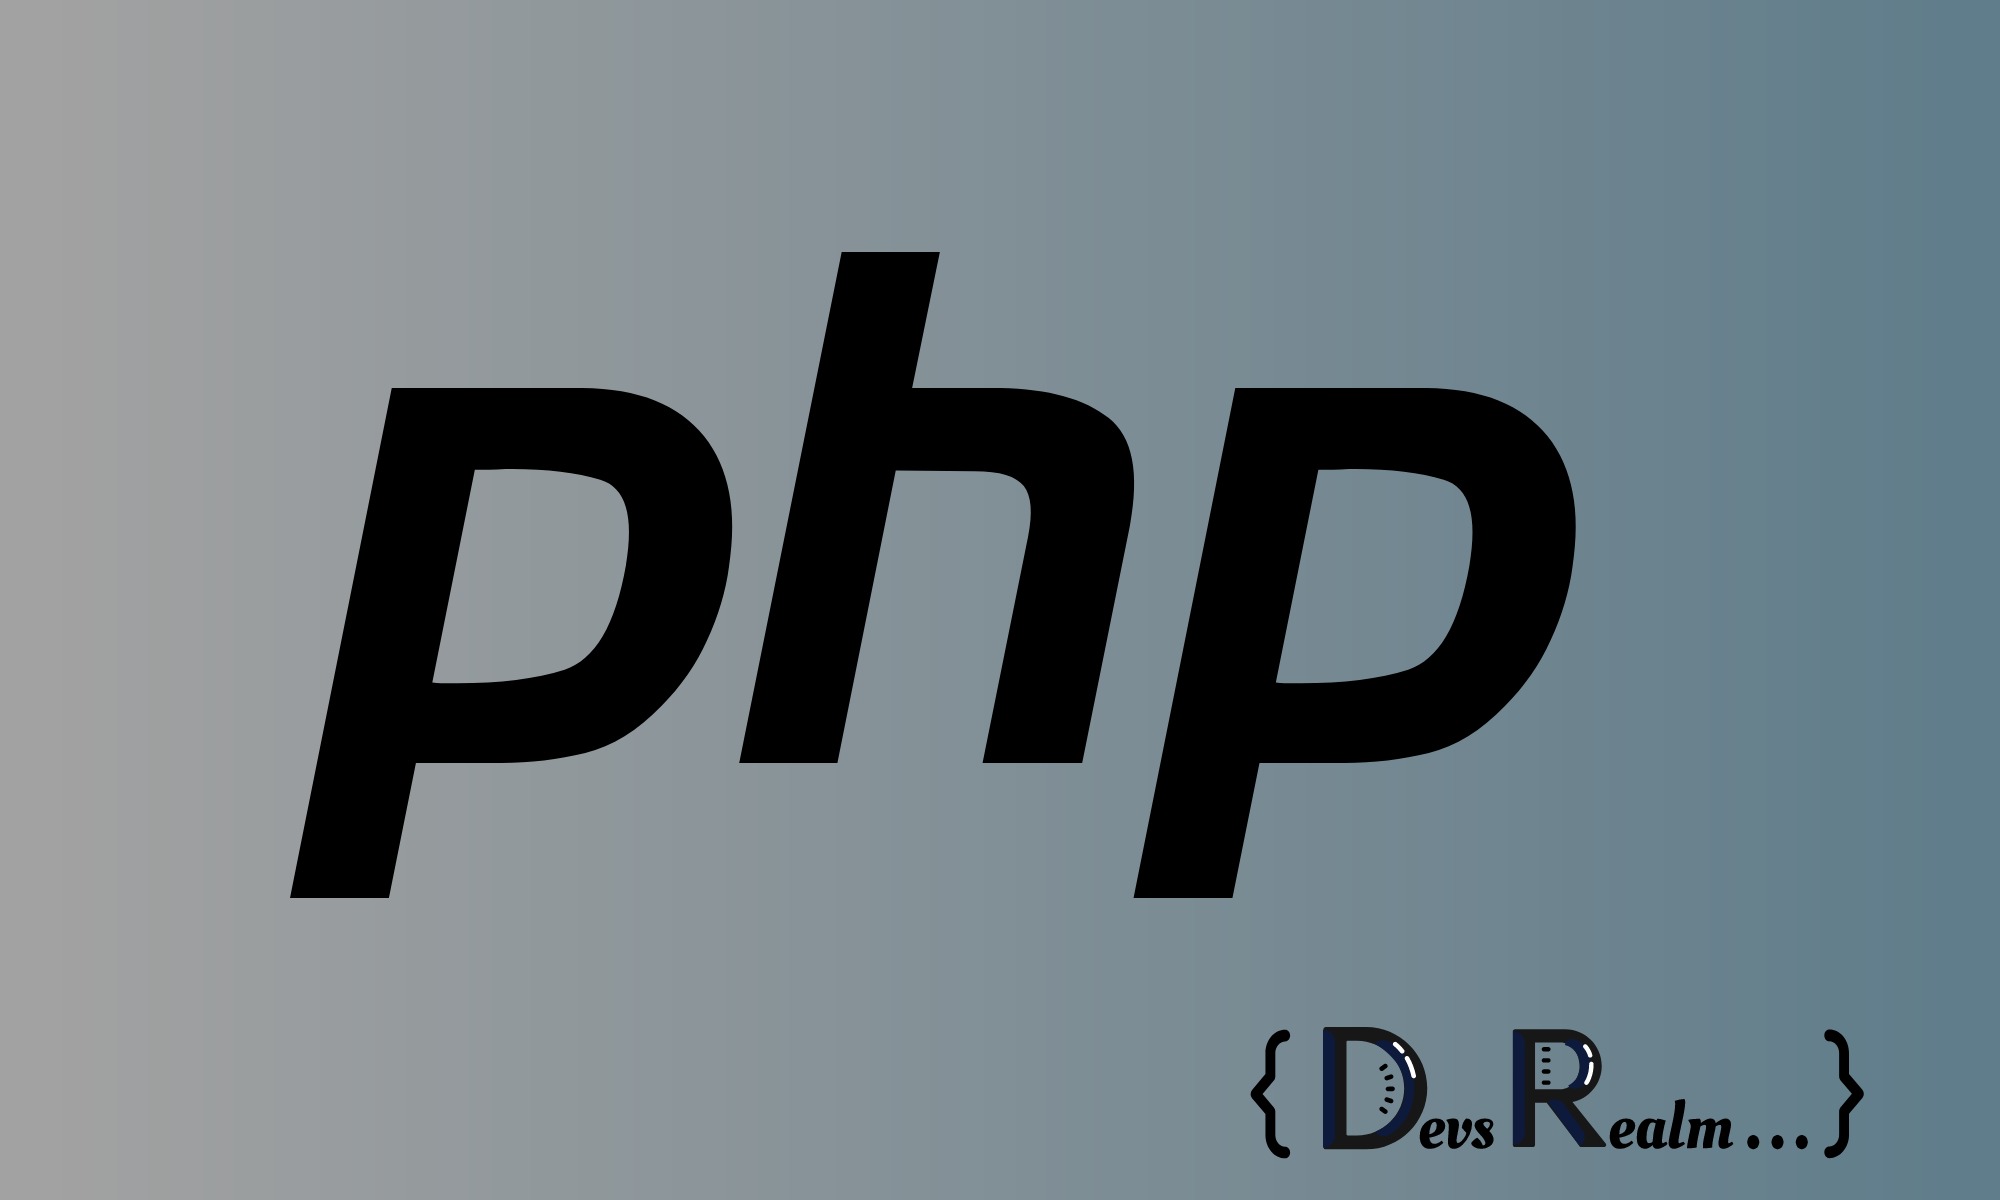 Getting Started With PHP (Introduction)